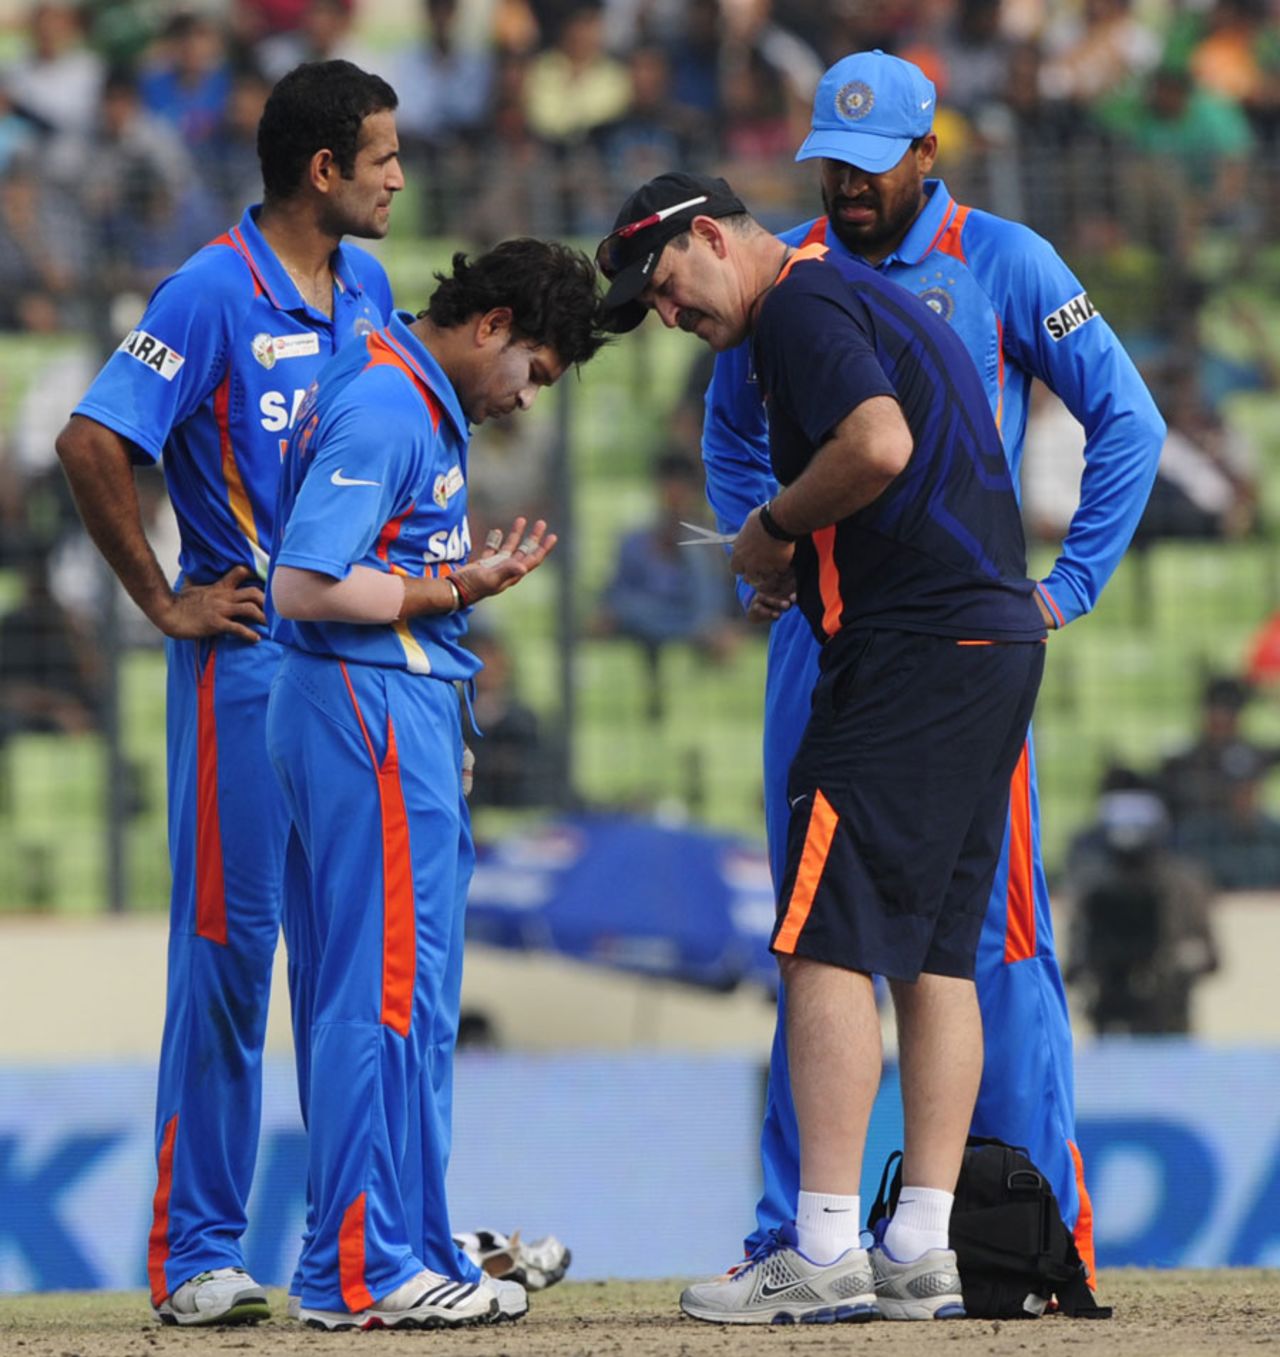 Sachin Tendulkar receives treatment after hurting his finger, India v Pakistan, Asia Cup, Mirpur, March 18, 2012